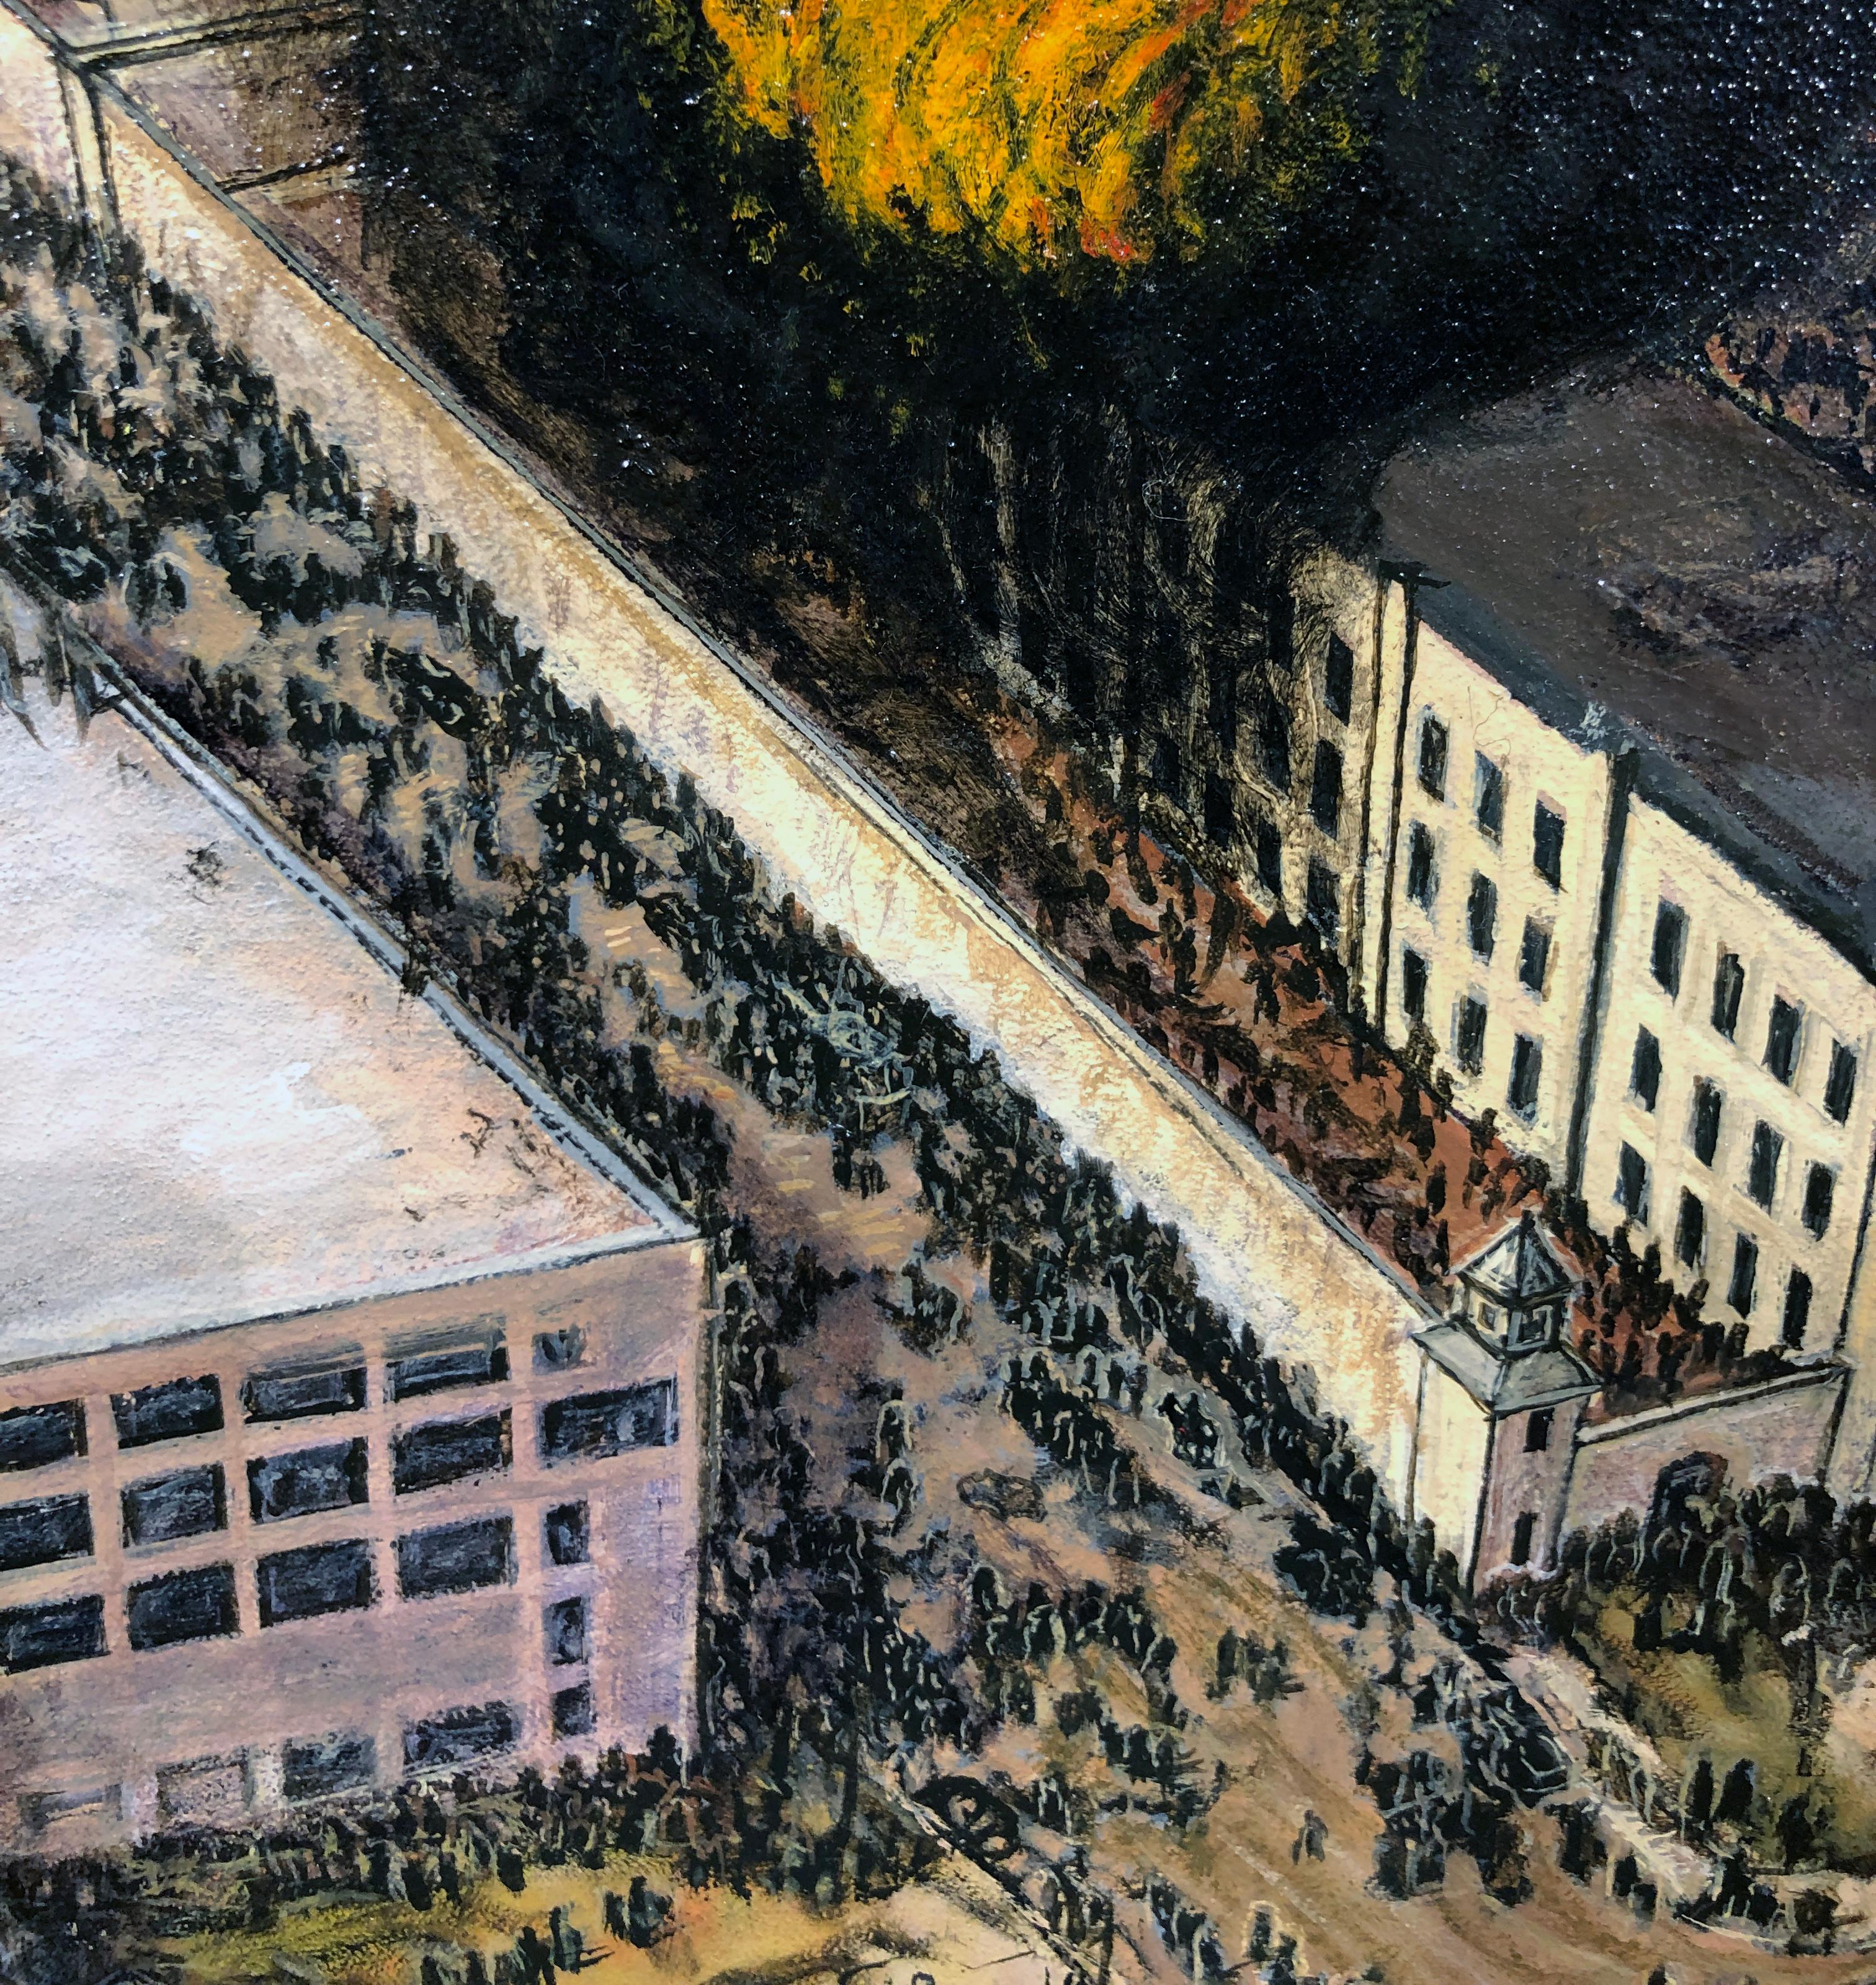 Ohio State Penitentiary Fire of 1930, Art of Disasters Series, Original Oil  - Brown Landscape Painting by Eric Edward Esper